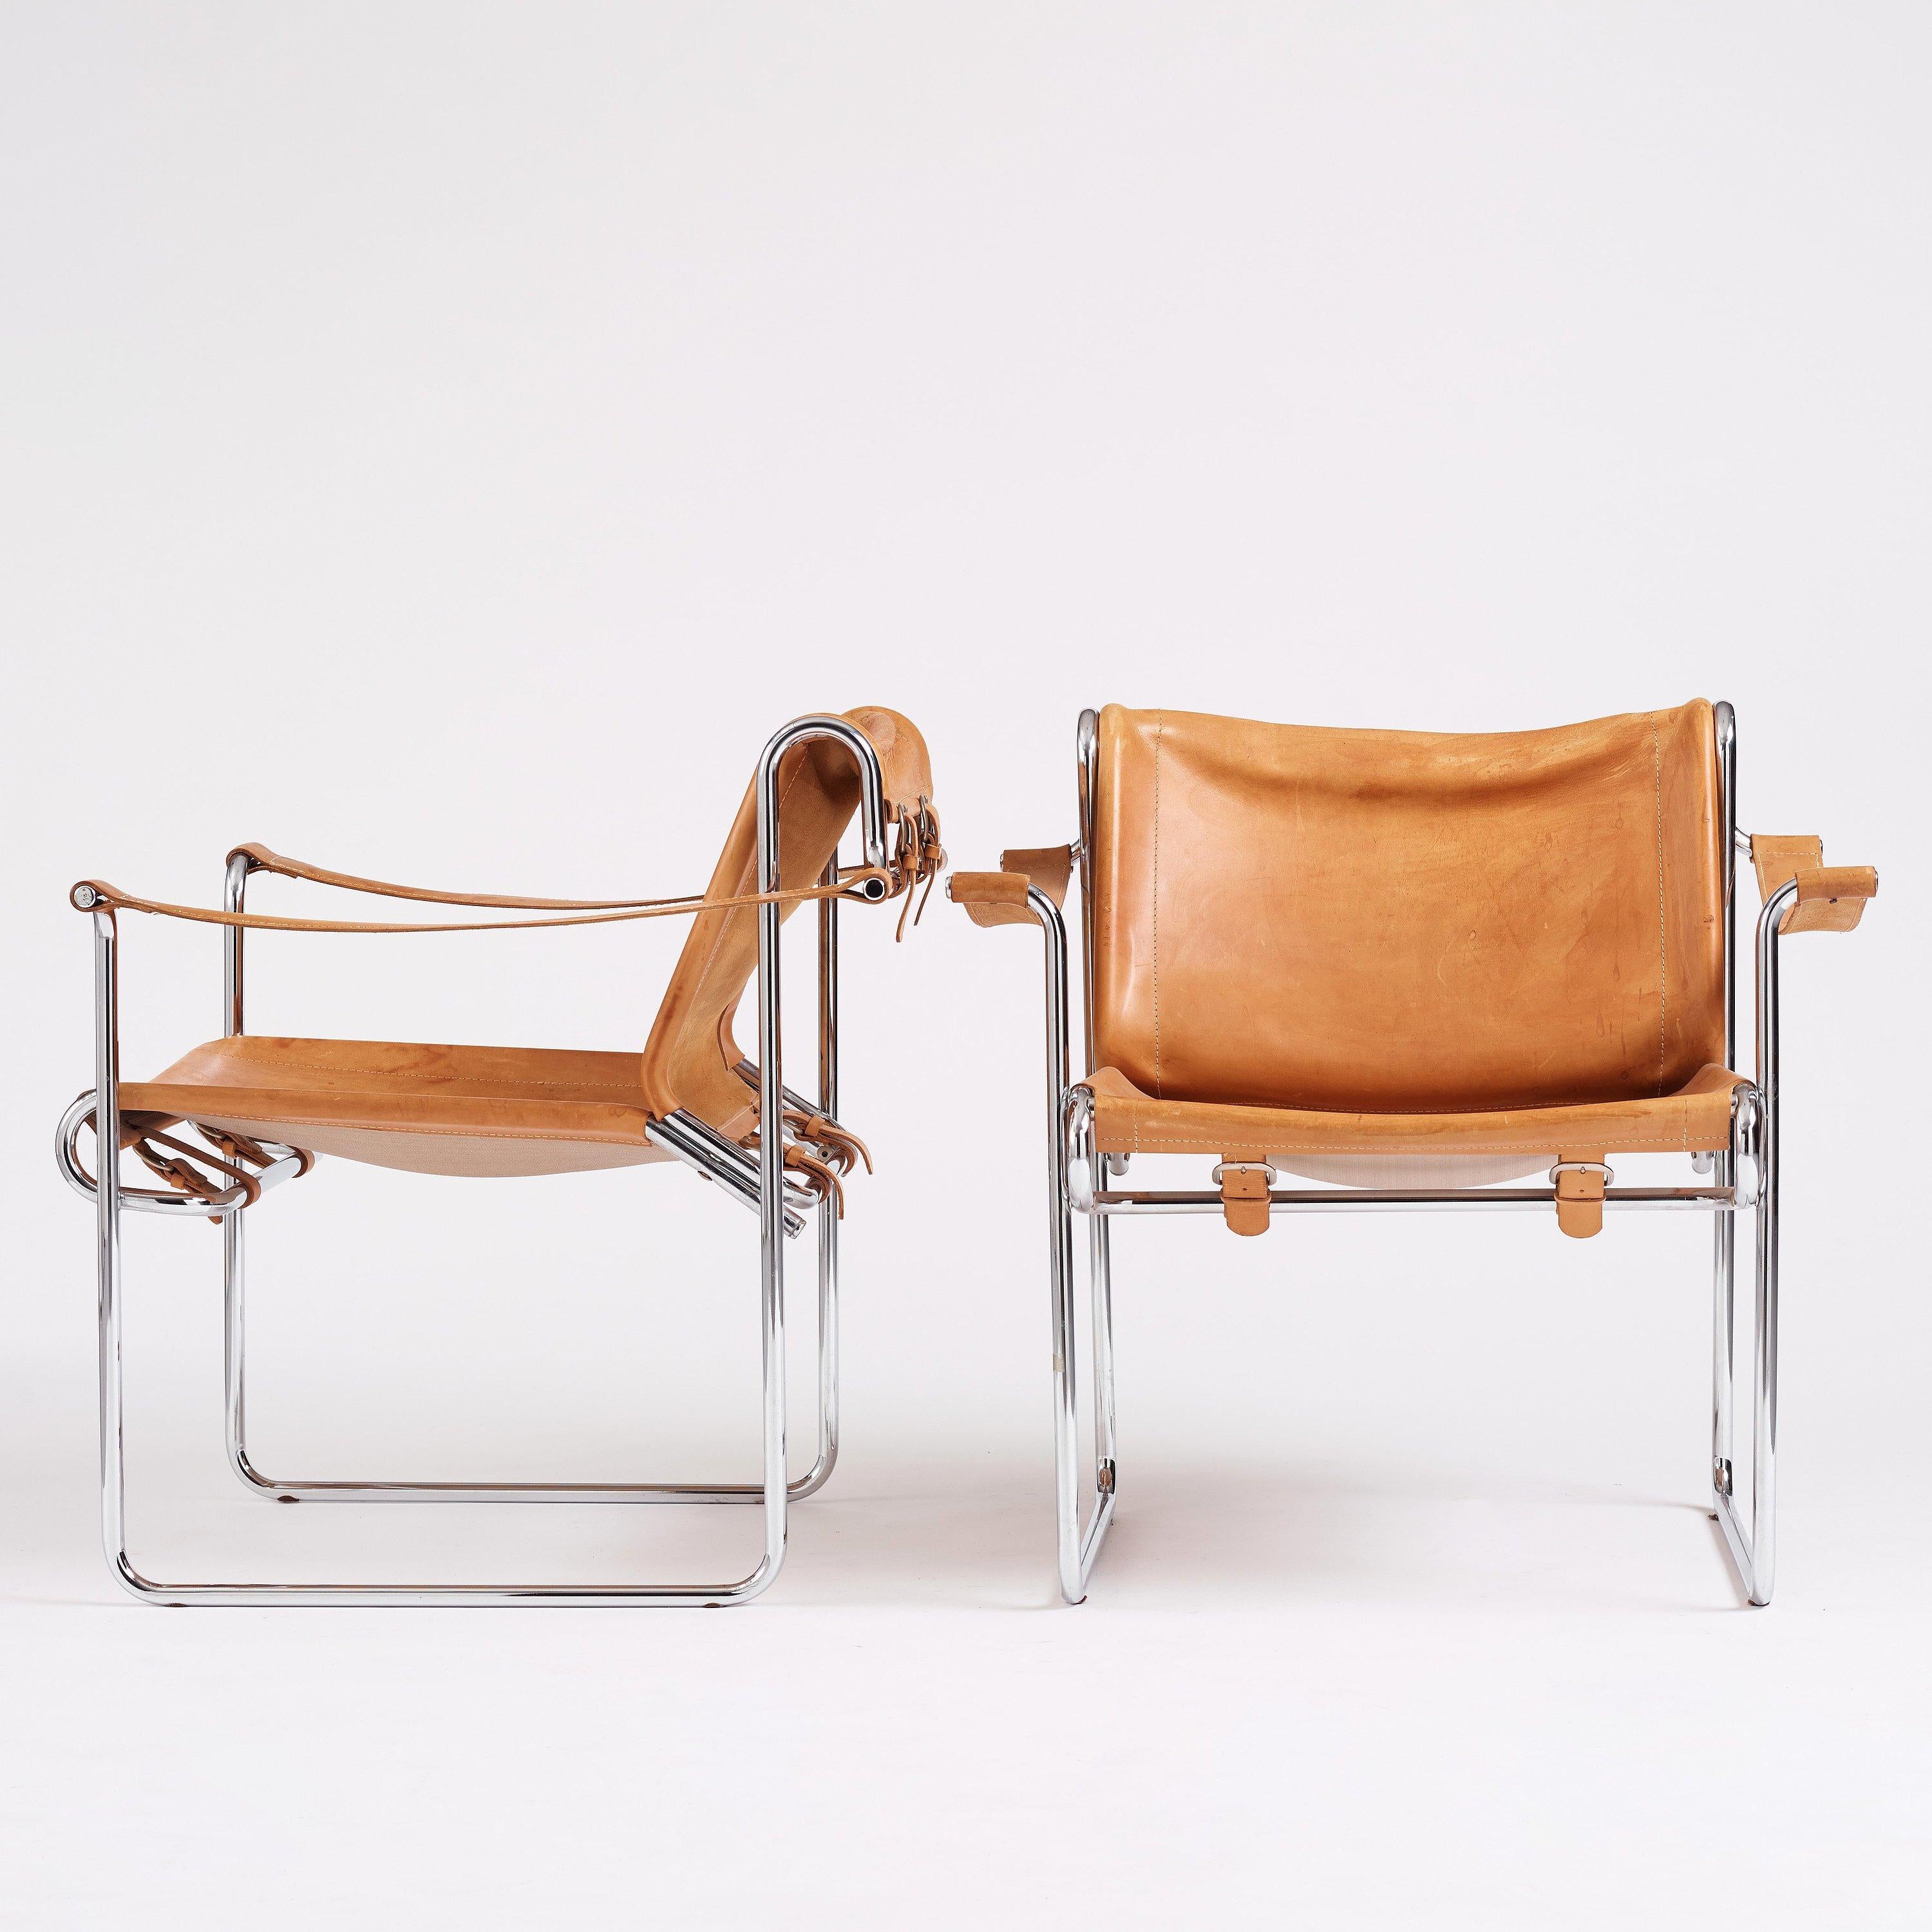 Pair of safari armchairs model Flamingo designed by Swedish Pethrus Lindlöf, made in chrome plated tubular steel, vintage original leather seat and armrests. Manufactured in Seventies.
At the Swedish Furniture Fair in 1976, AB Lindlöfs Möbler